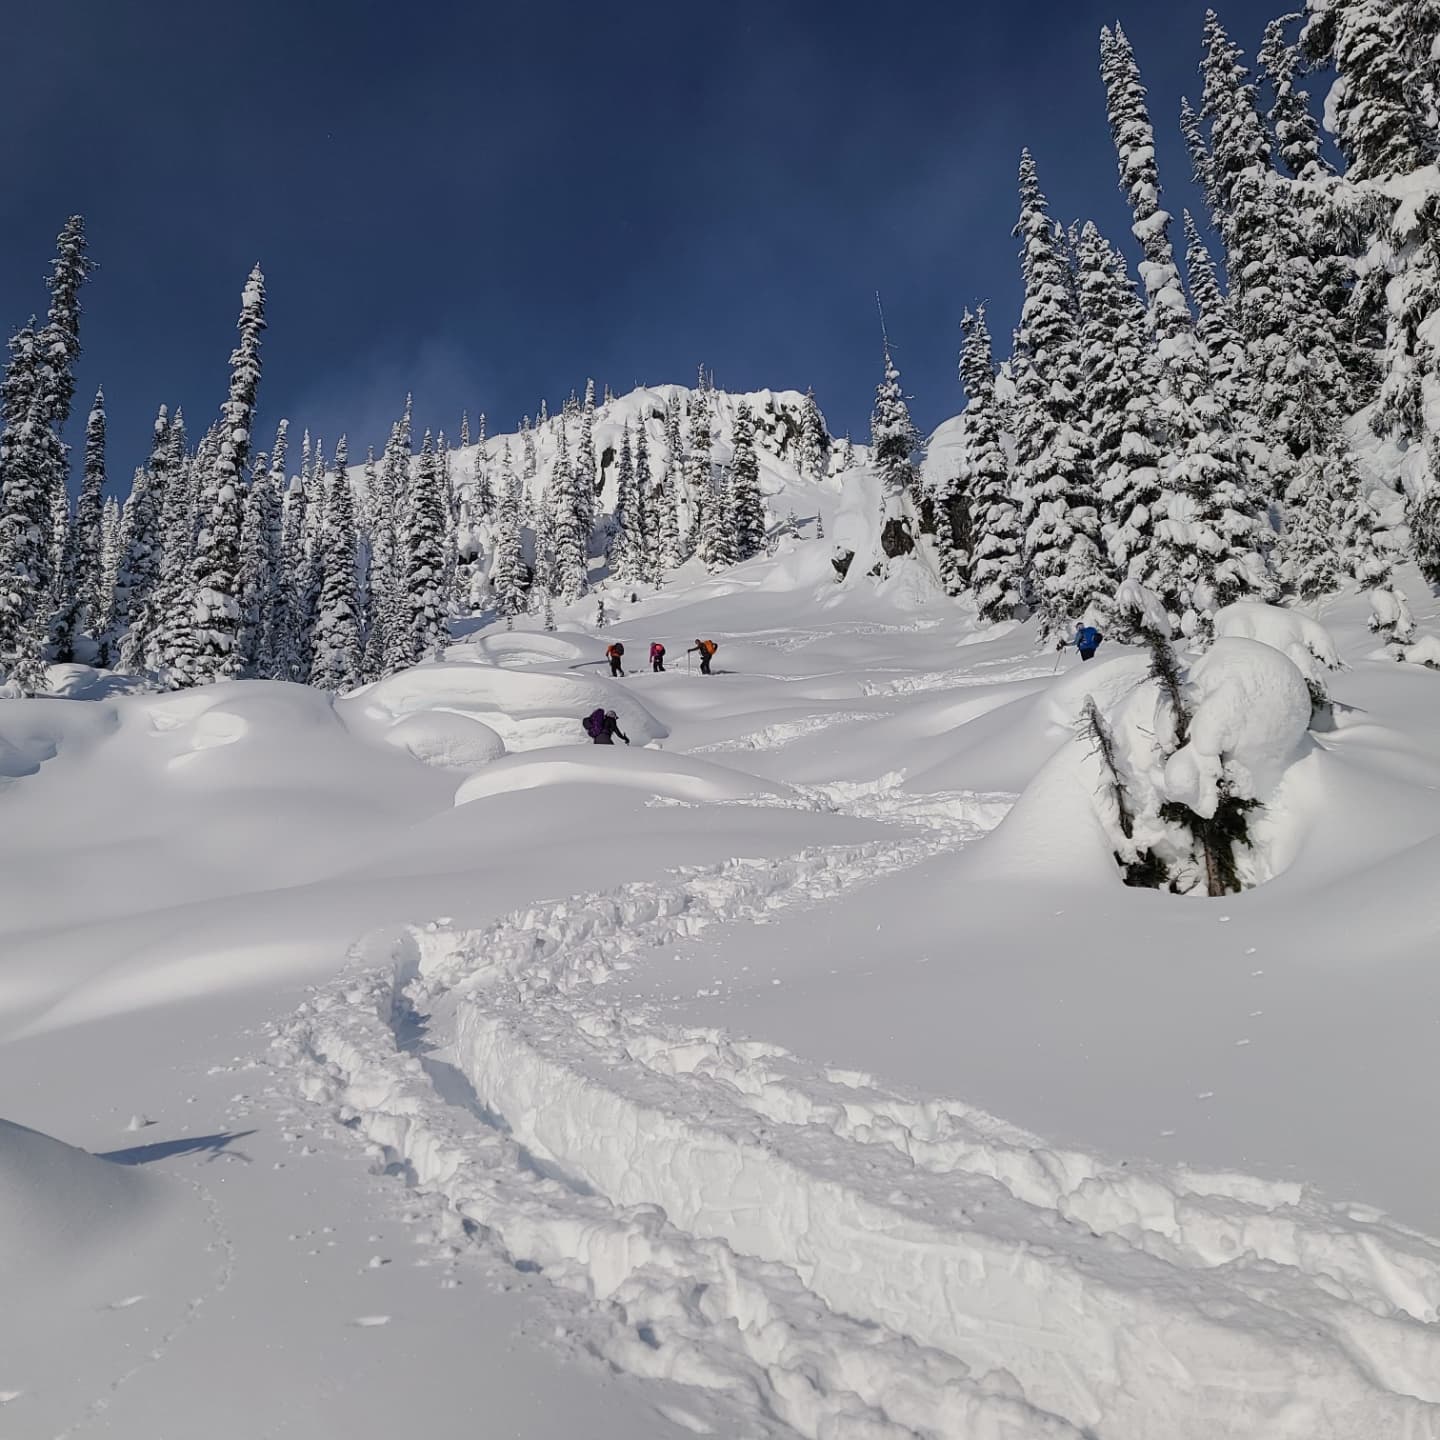 BC backcountry skiers